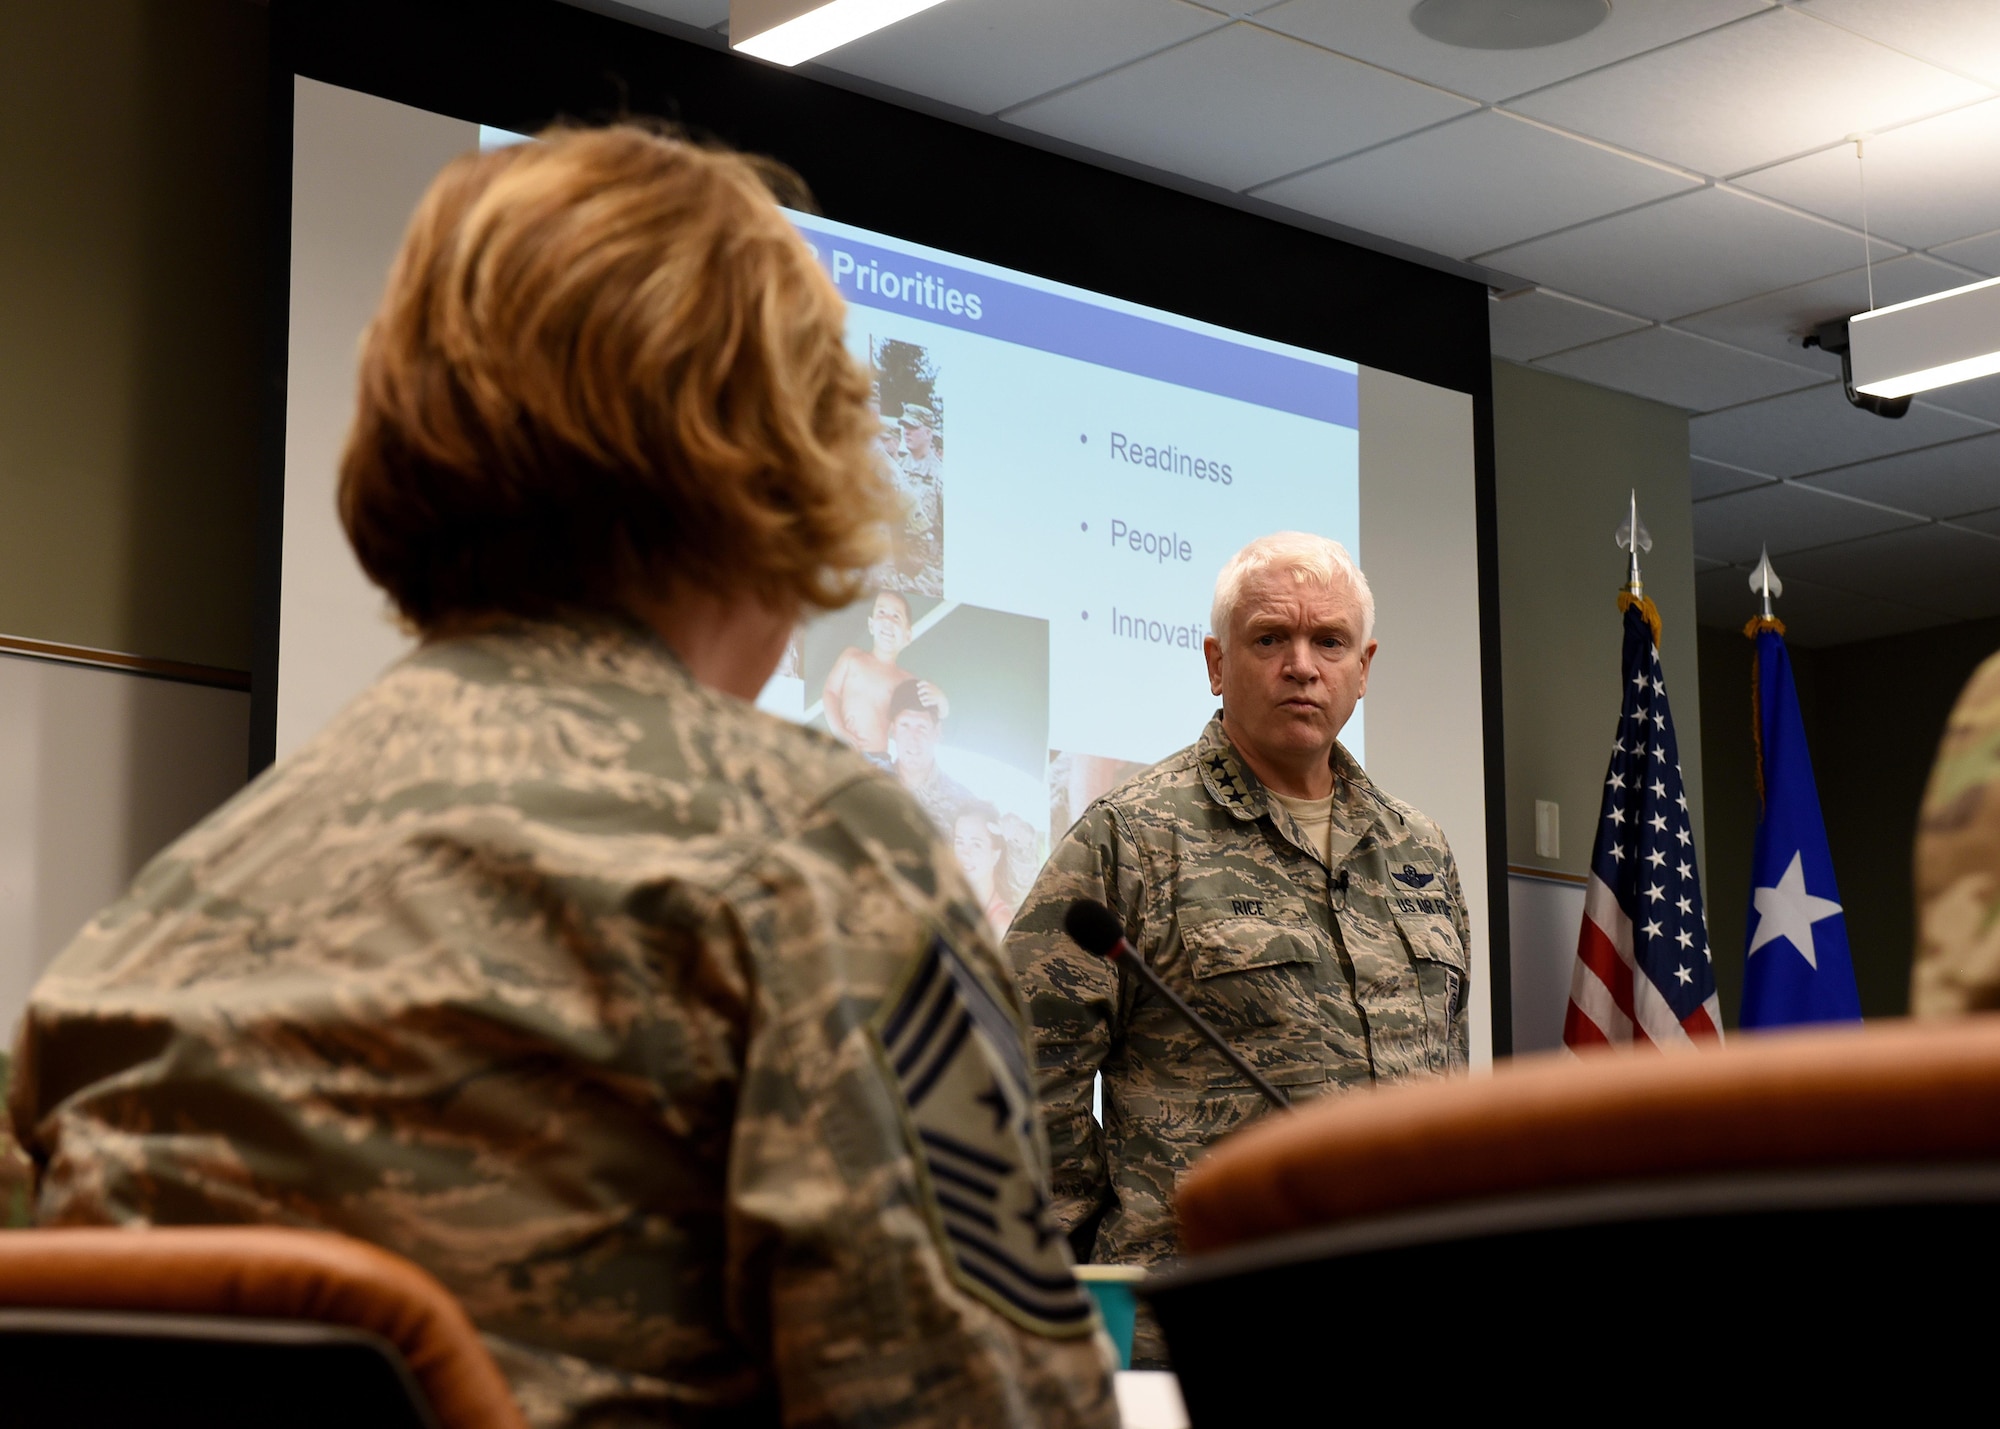 The Director of the Air National Guard, Lt. Gen. L. Scott Rice, visits the I.G. Brown Training and Education Center, May 2, 2017, in east Tennessee. General Rice spoke with the National Guard’s Joint Enlisted Advisory Council (JEAC), or about 90 senior enlisted National Guard Soldiers and Airmen from the states and territories here this week. He also toured TEC’s campus, meet professional military education students and attended the afternoon retreat ceremony with students and staff. (U.S. Air National Guard photo by Master Sgt. Mike R. Smith)